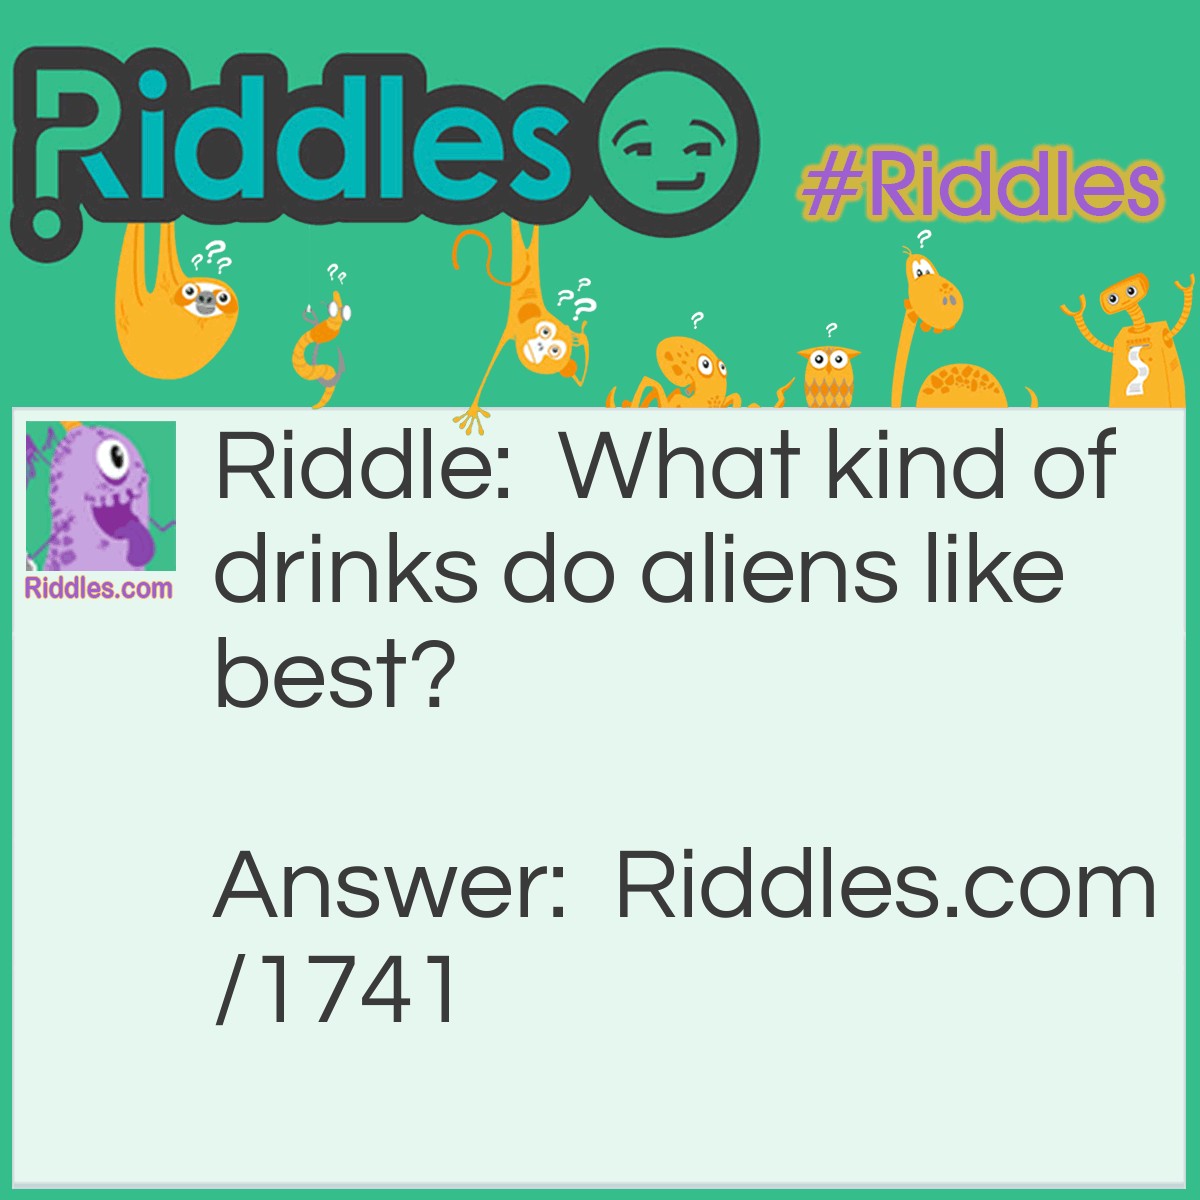 Riddle: What kind of drinks do aliens like best? Answer: Gravi-tea.